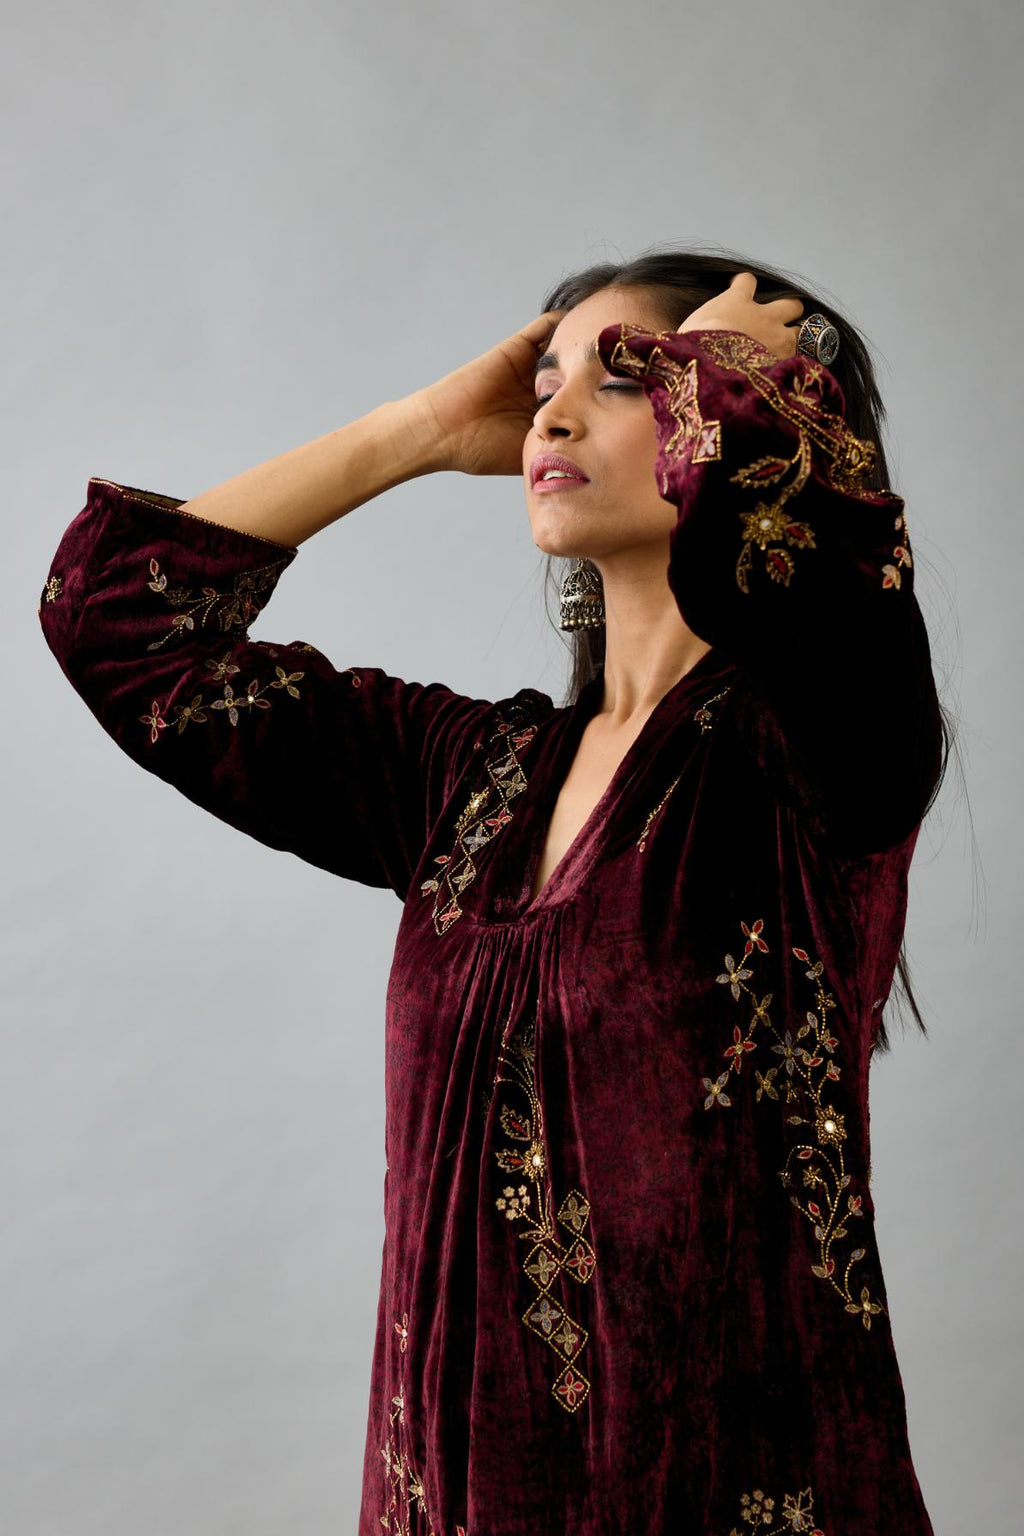 Maroon silk velvet hand block printed easy fit dress with, highlighted with beads, sequins and zari work, paired with green light silk narrow stole with bugle beads fringes.